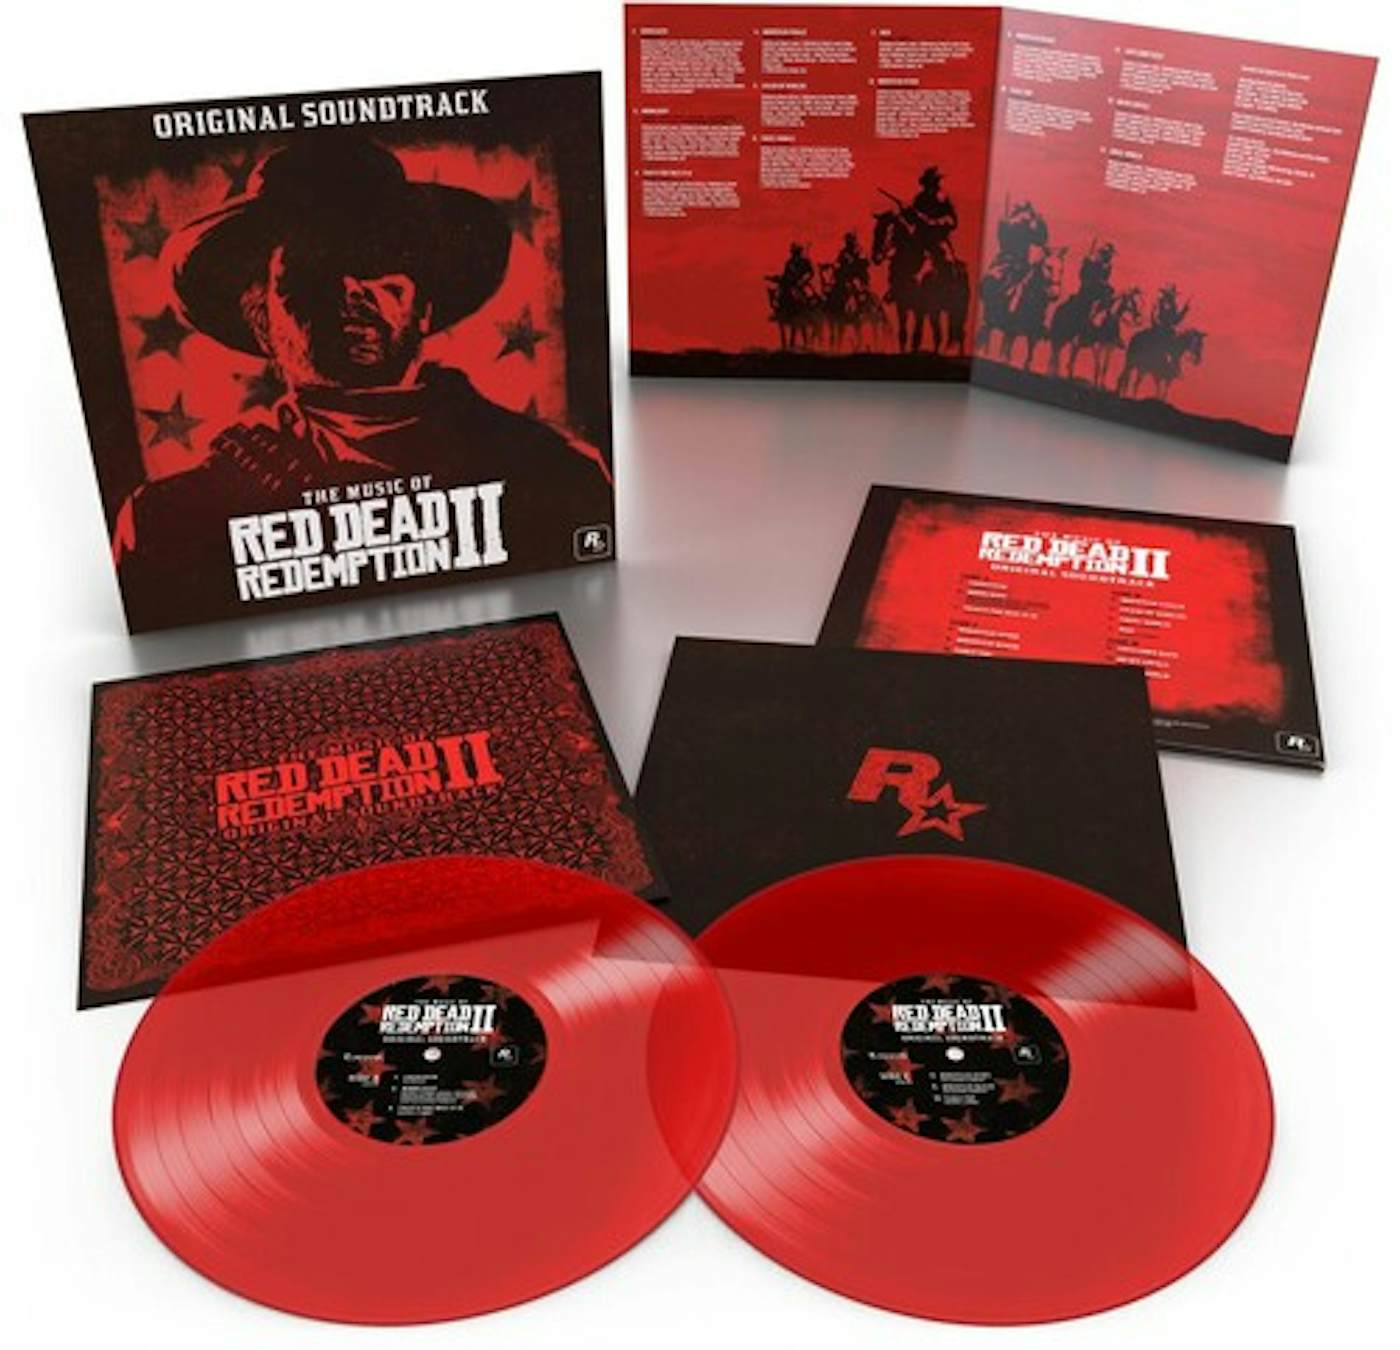 Music Of Red Dead Redemption 2 / Music Of Red Dead Redemption 2 / Original Soundtrack (2LP) Vinyl Record